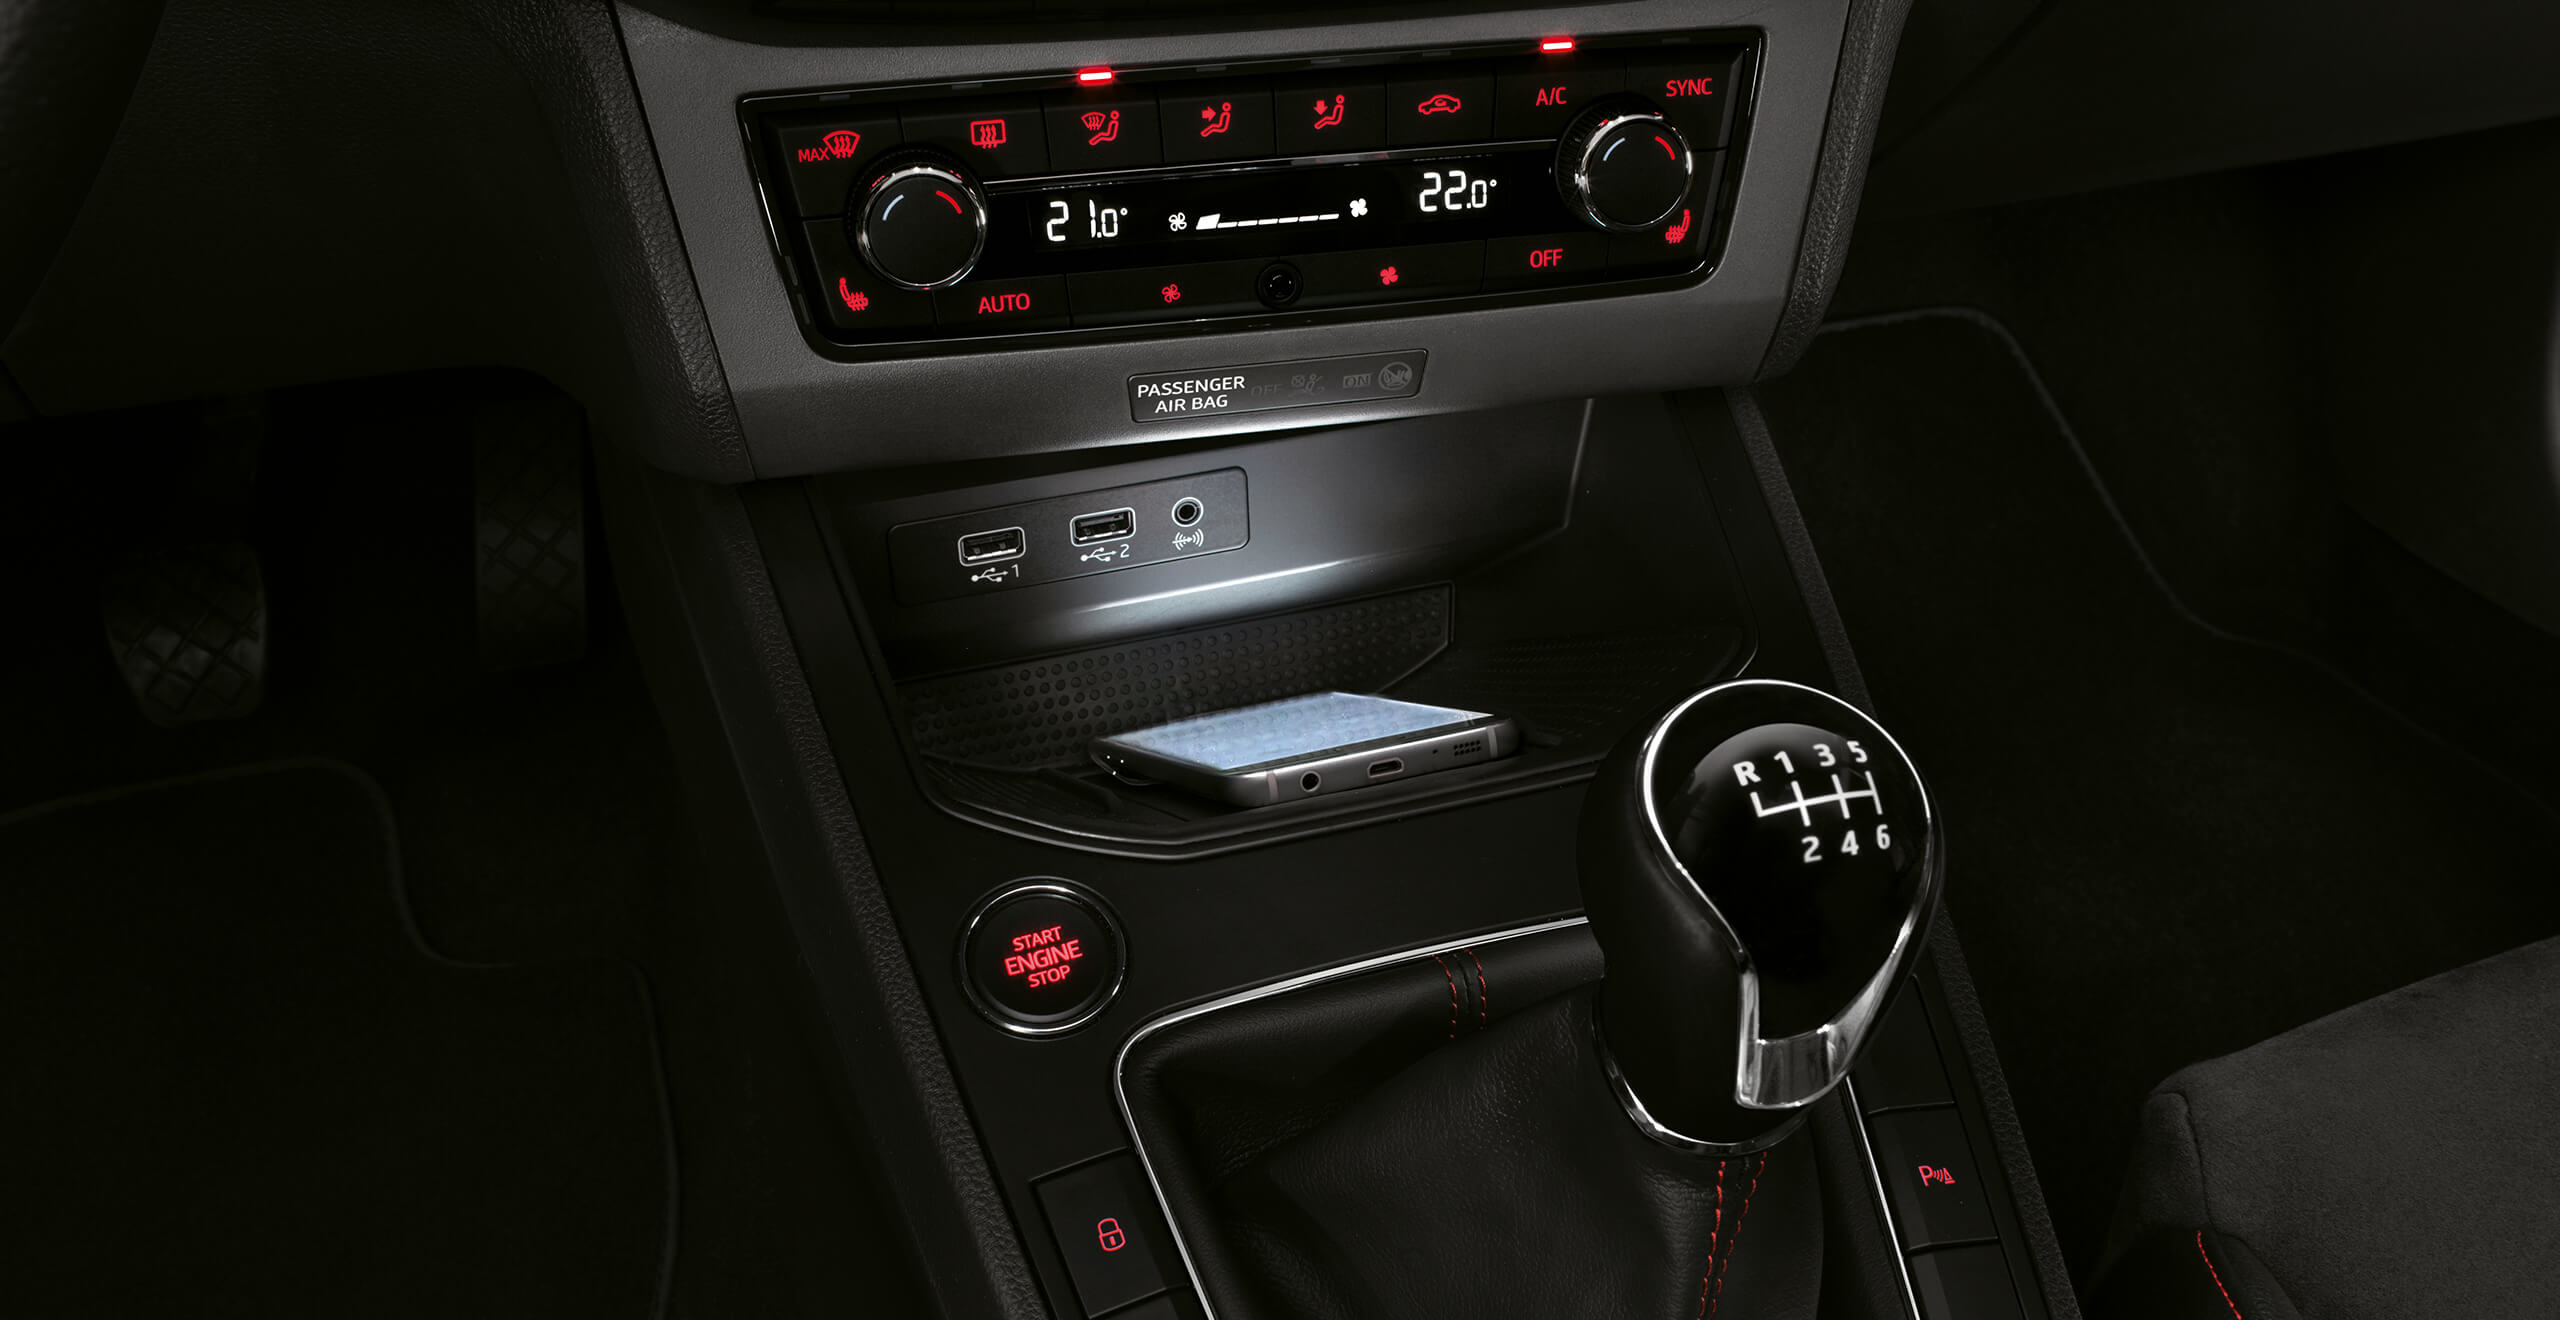 SEAT Ibiza detailed view Connectivity box, wireless charging